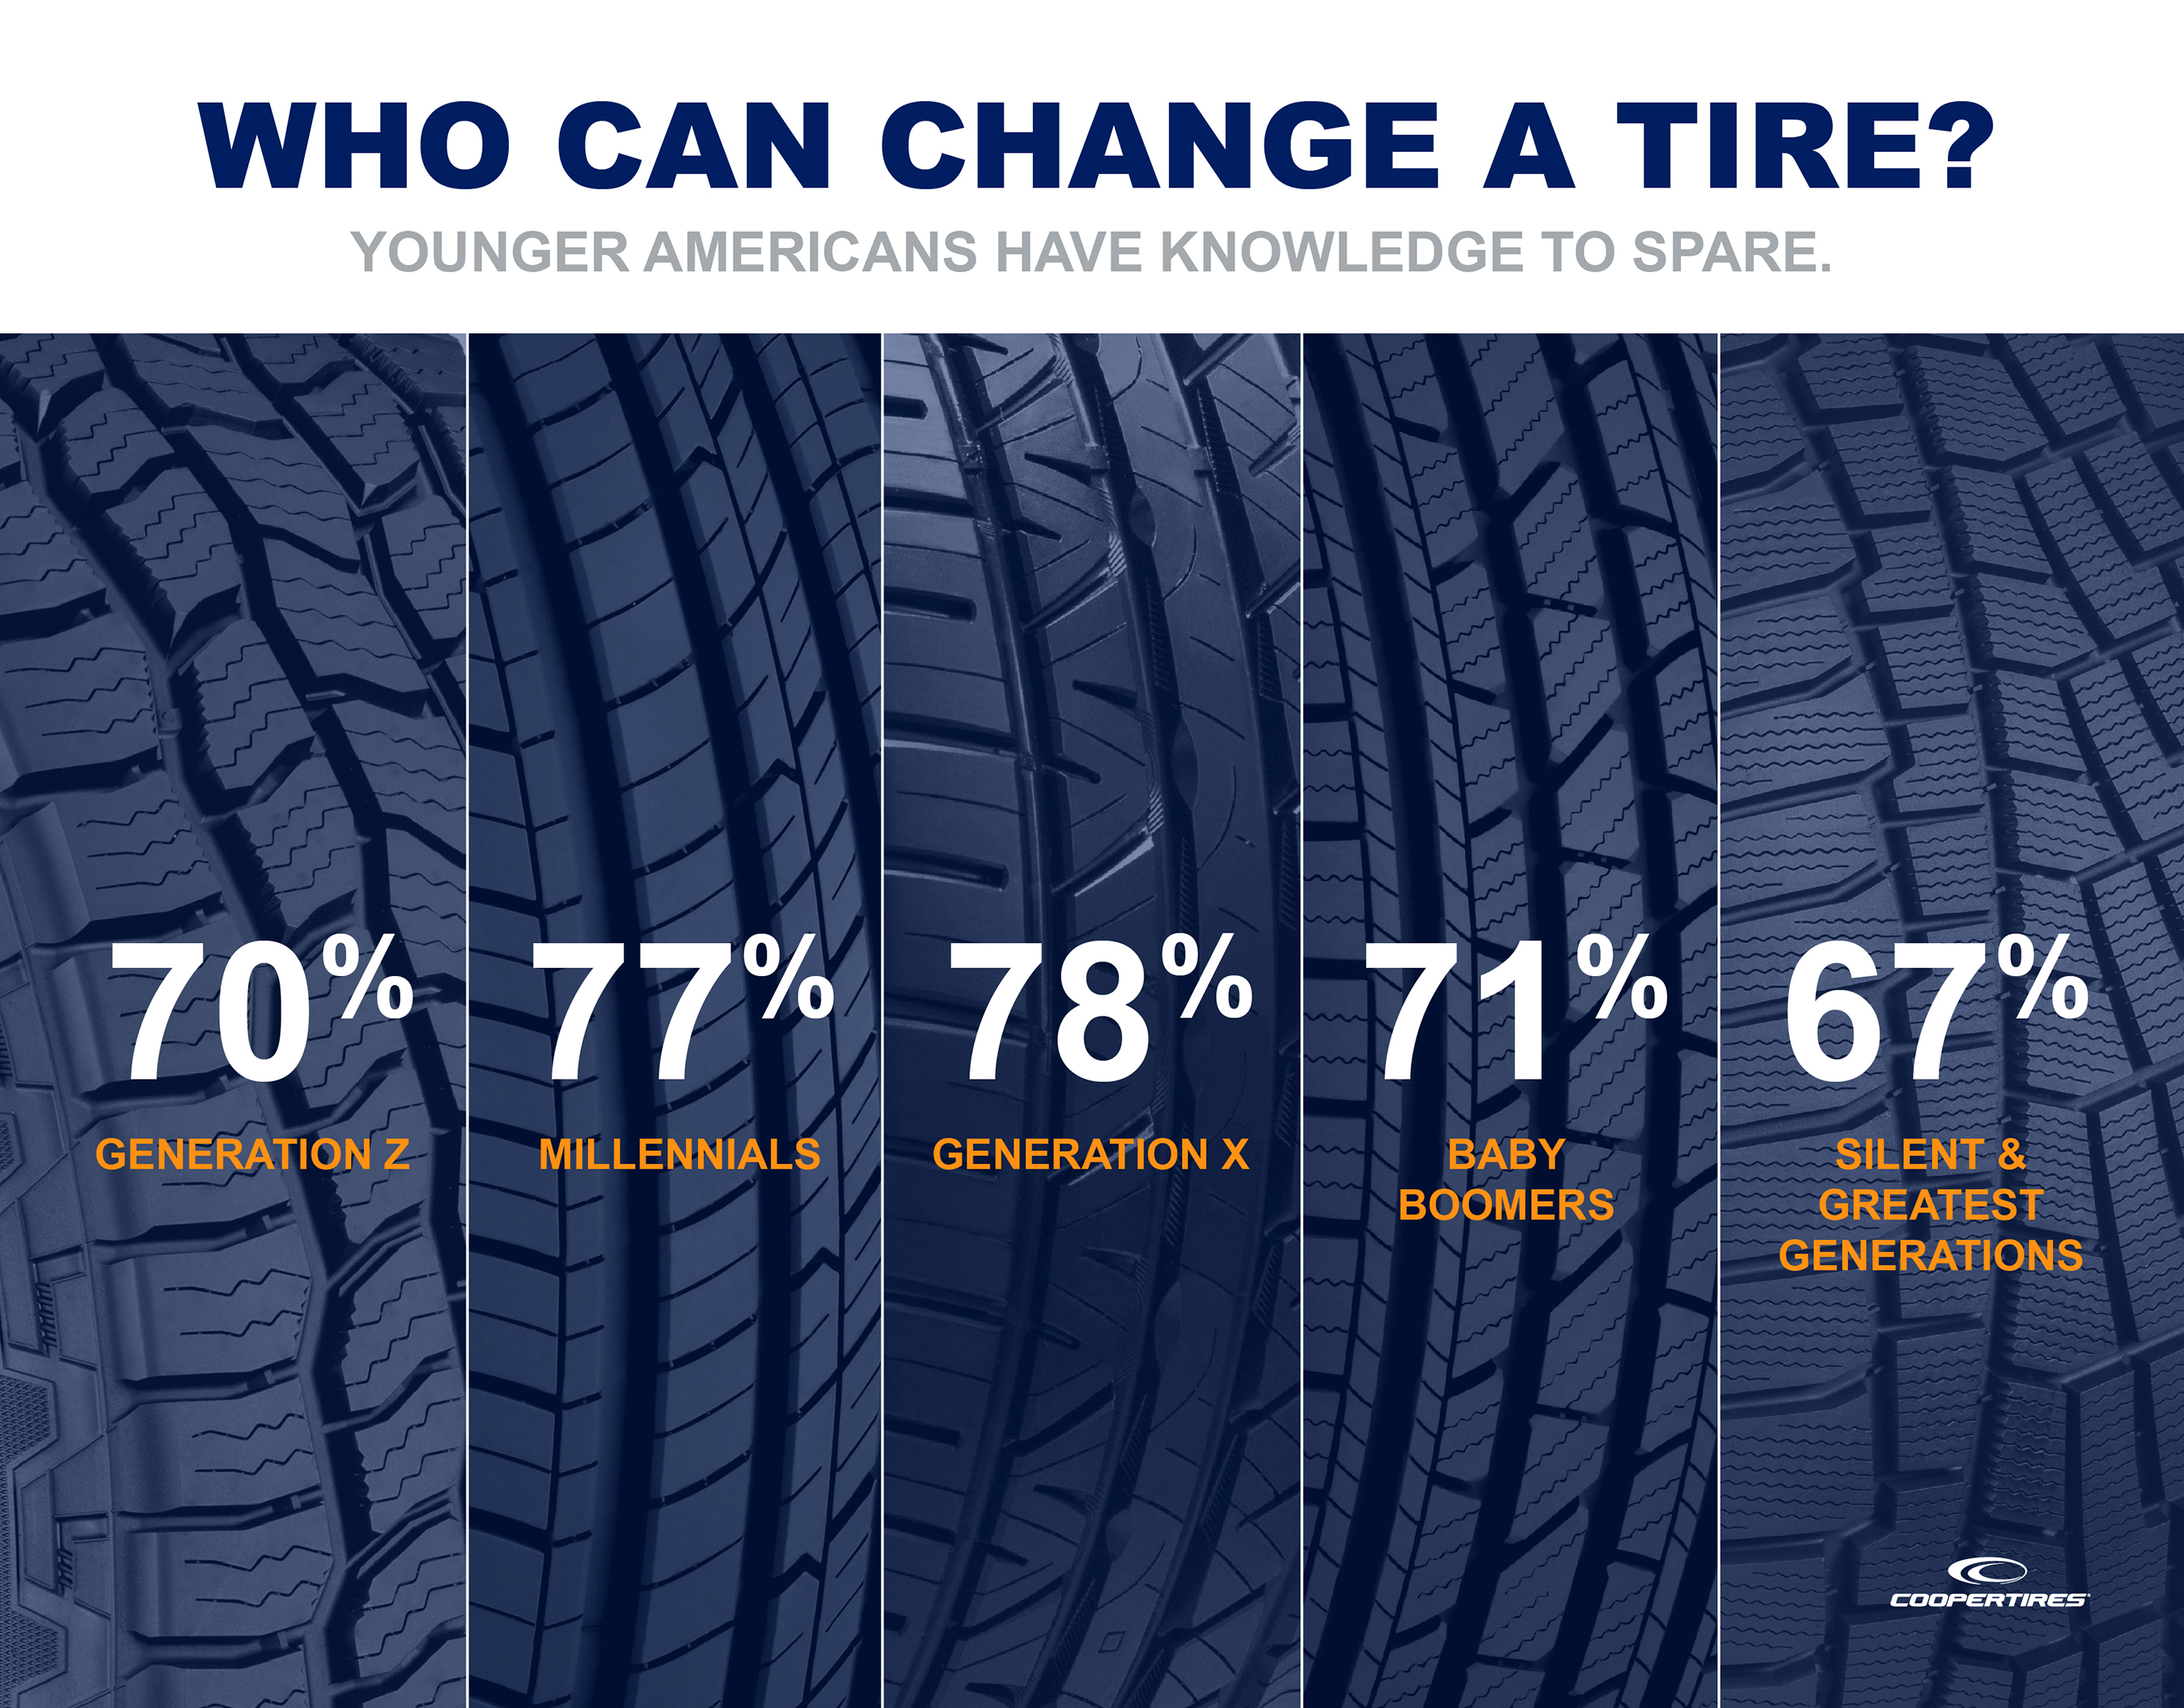 National Survey Reveals Large Majority of Americans Know How to Change a Tire